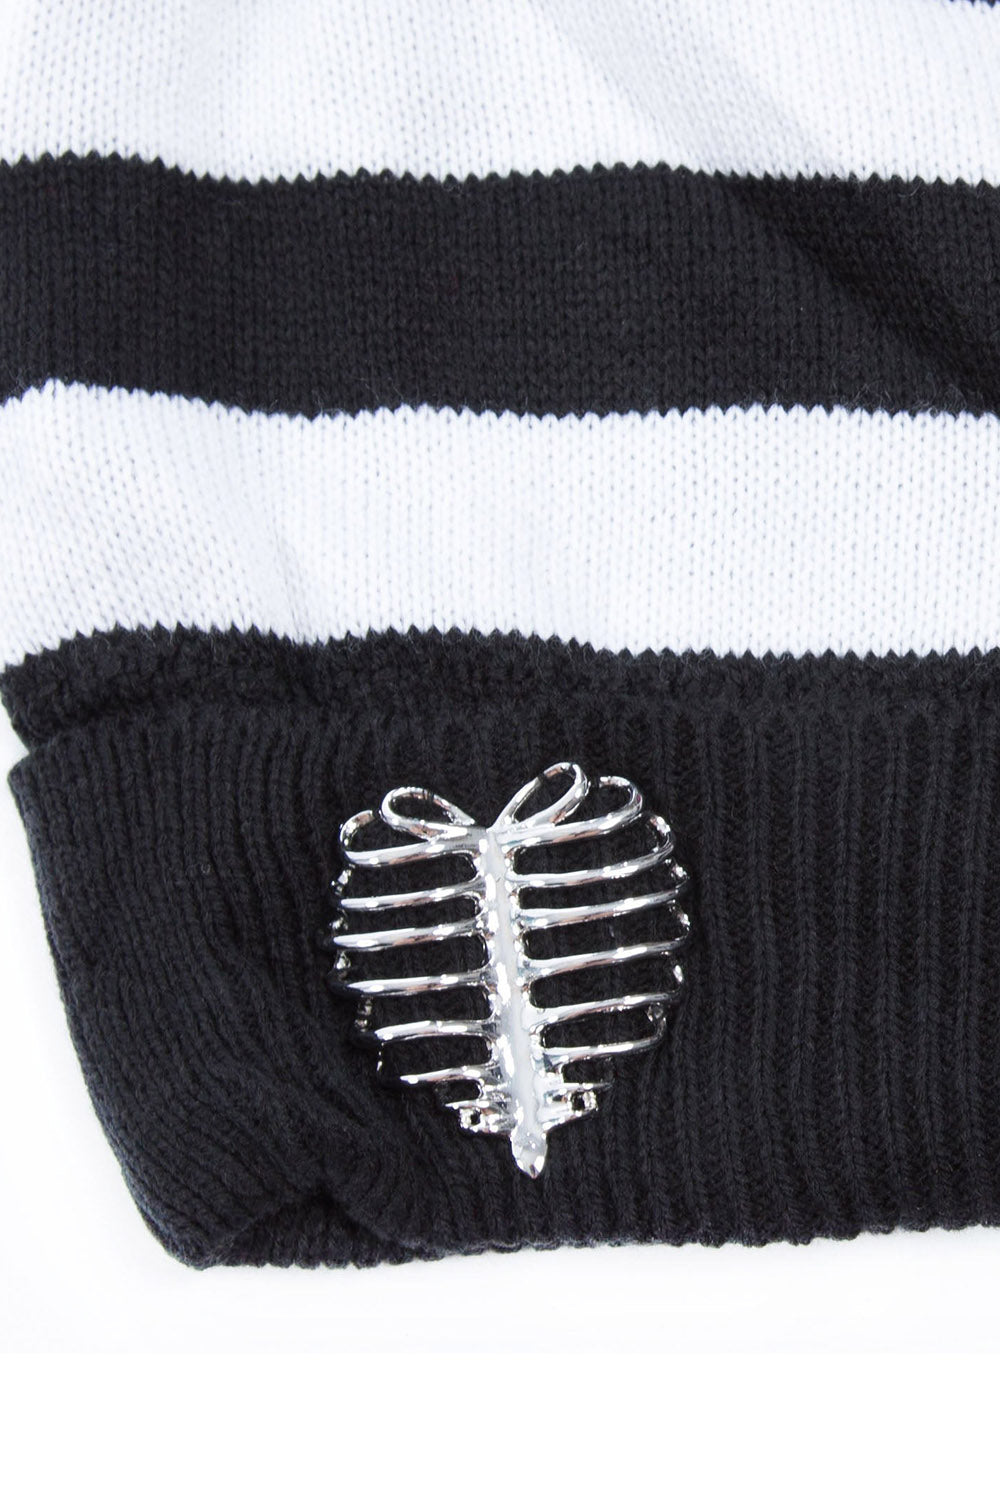 knitted black and white beanie hat